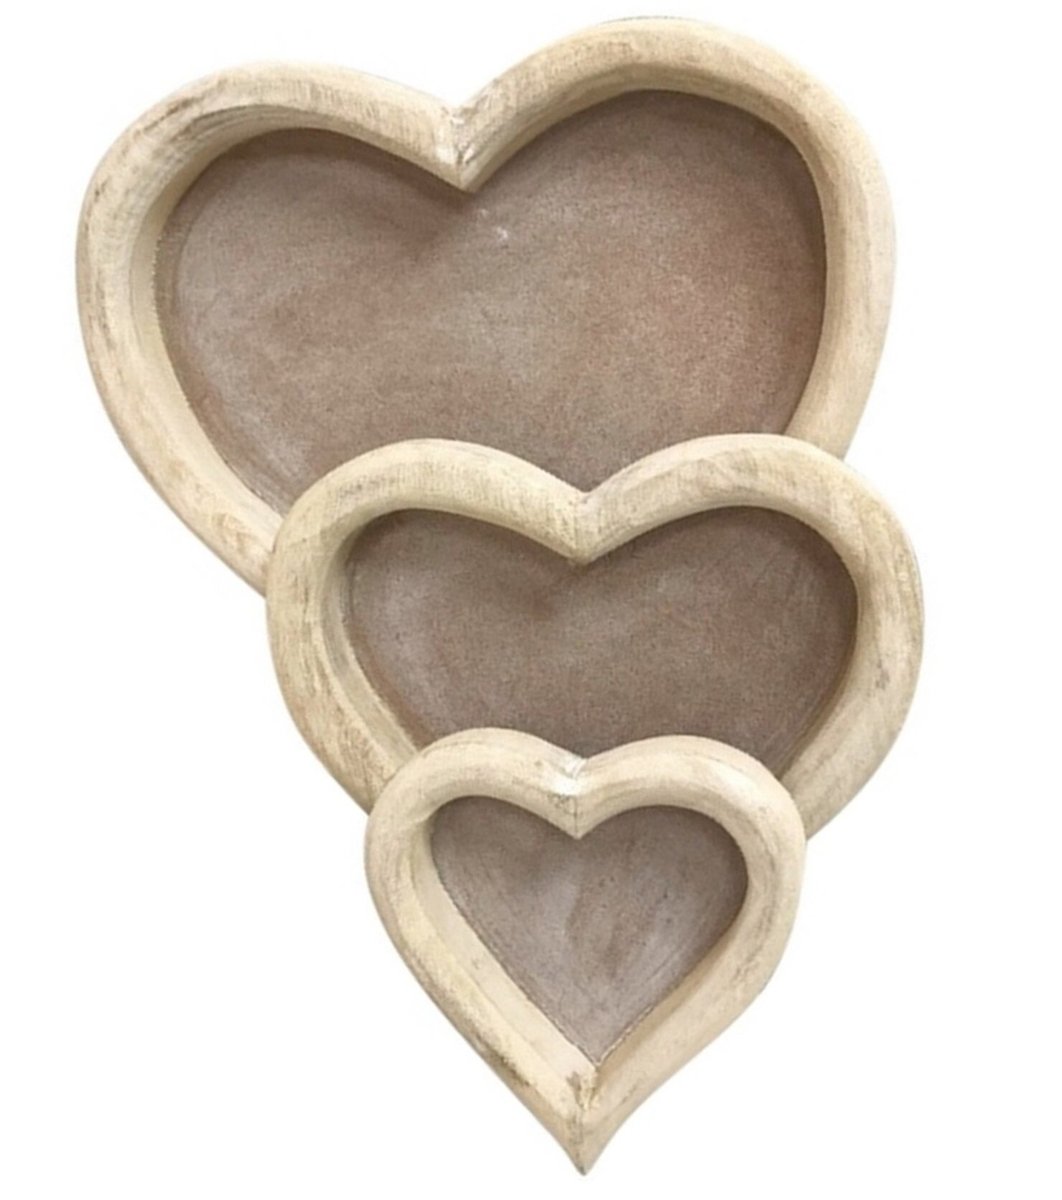 zcu.io/Tdu6  ◄ A Set of 3 Wooden Heart Trays. These trays will be a stylish addition to any home.  Large:35x36x4.5 cm Medium: 26x25x4 cm Small: 17x16x4 cm.  #woodentrays #woodentray  #foodtray #kitchendecor #serveware #uniquehomedecor  #kitchenset